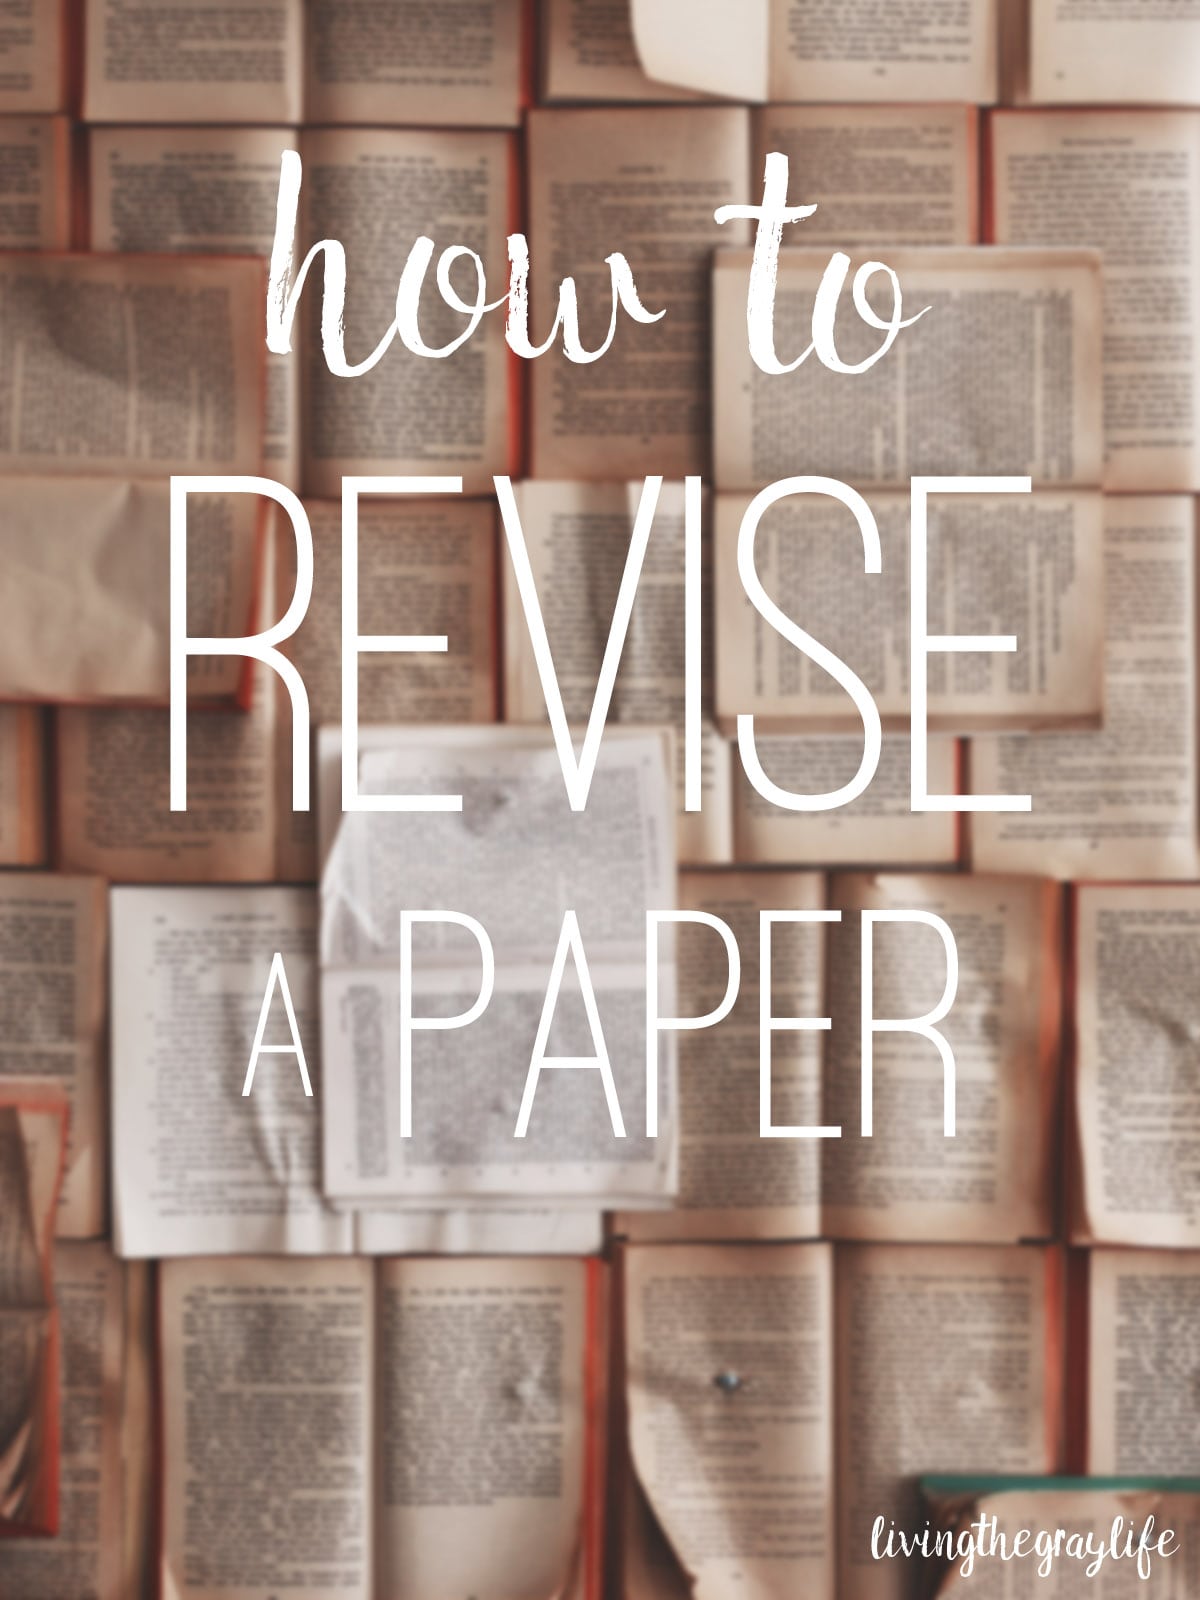 Have a paper due that needs revising? Check out these tips & tricks to get that "A"!